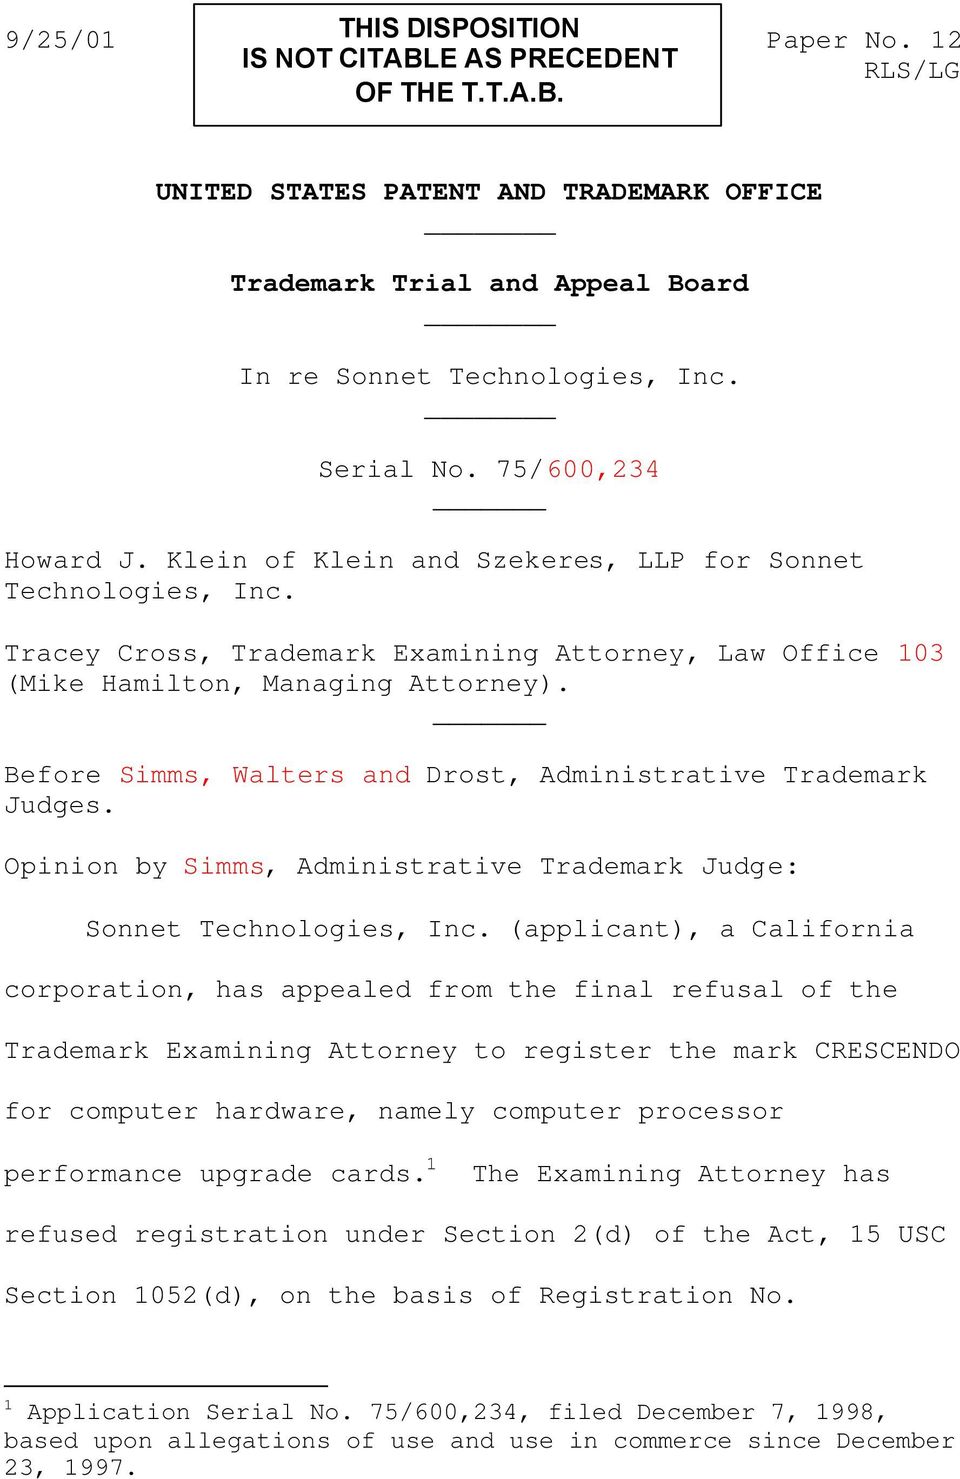 Before Simms, Walters and Drost, Administrative Trademark Judges. Opinion by Simms, Administrative Trademark Judge: Sonnet Technologies, Inc.